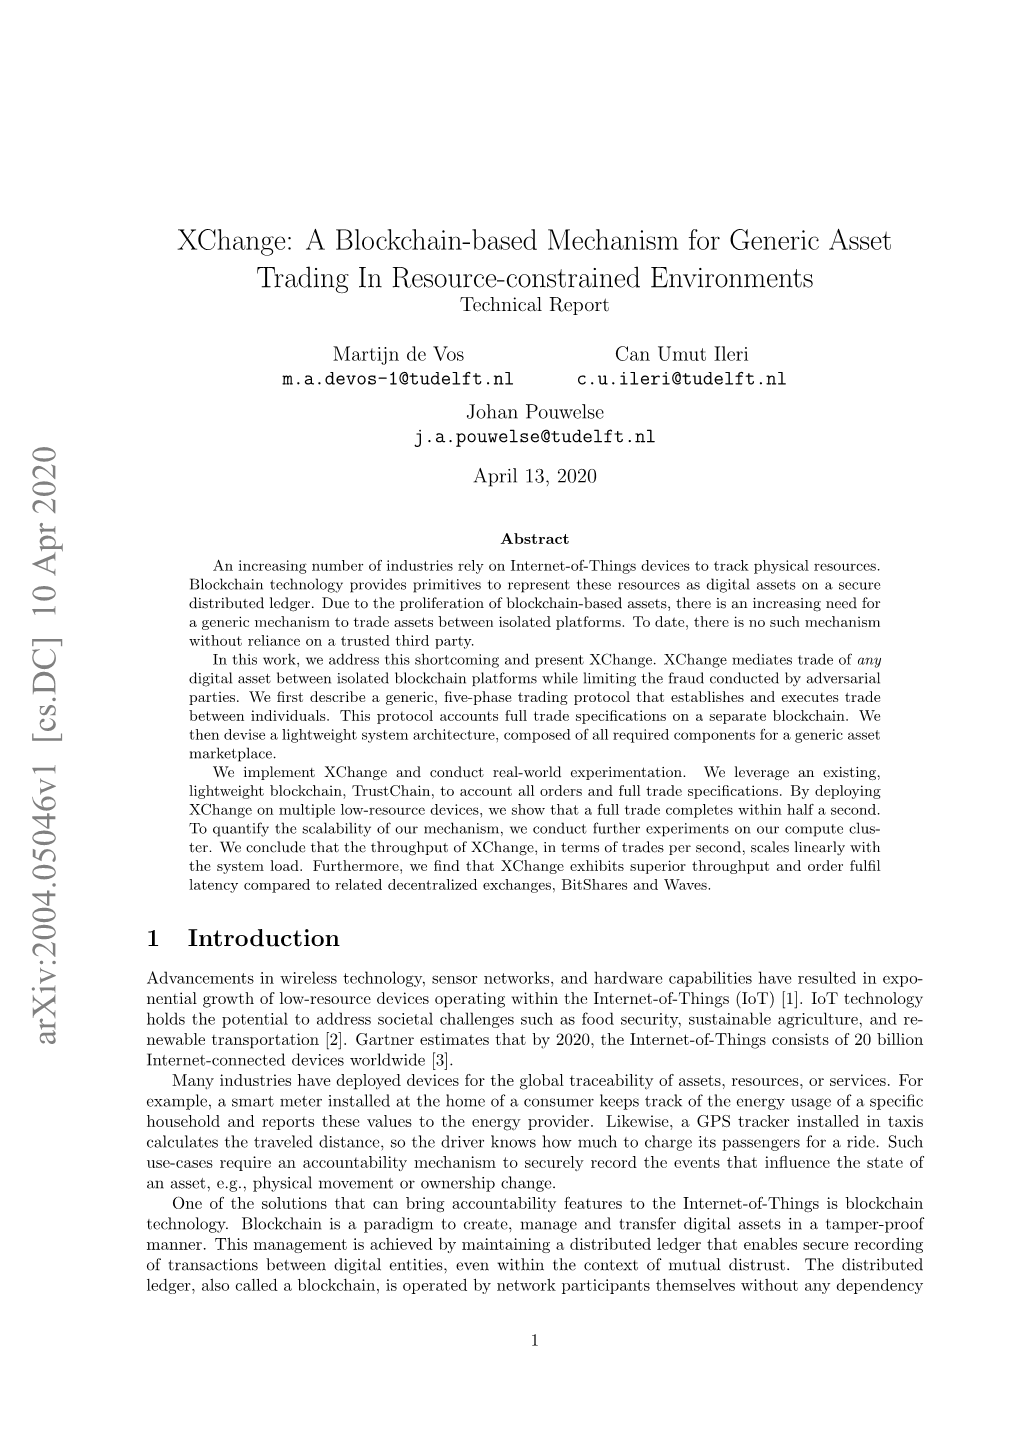 A Blockchain-Based Mechanism for Generic Asset Trading in Resource-Constrained Environments Technical Report